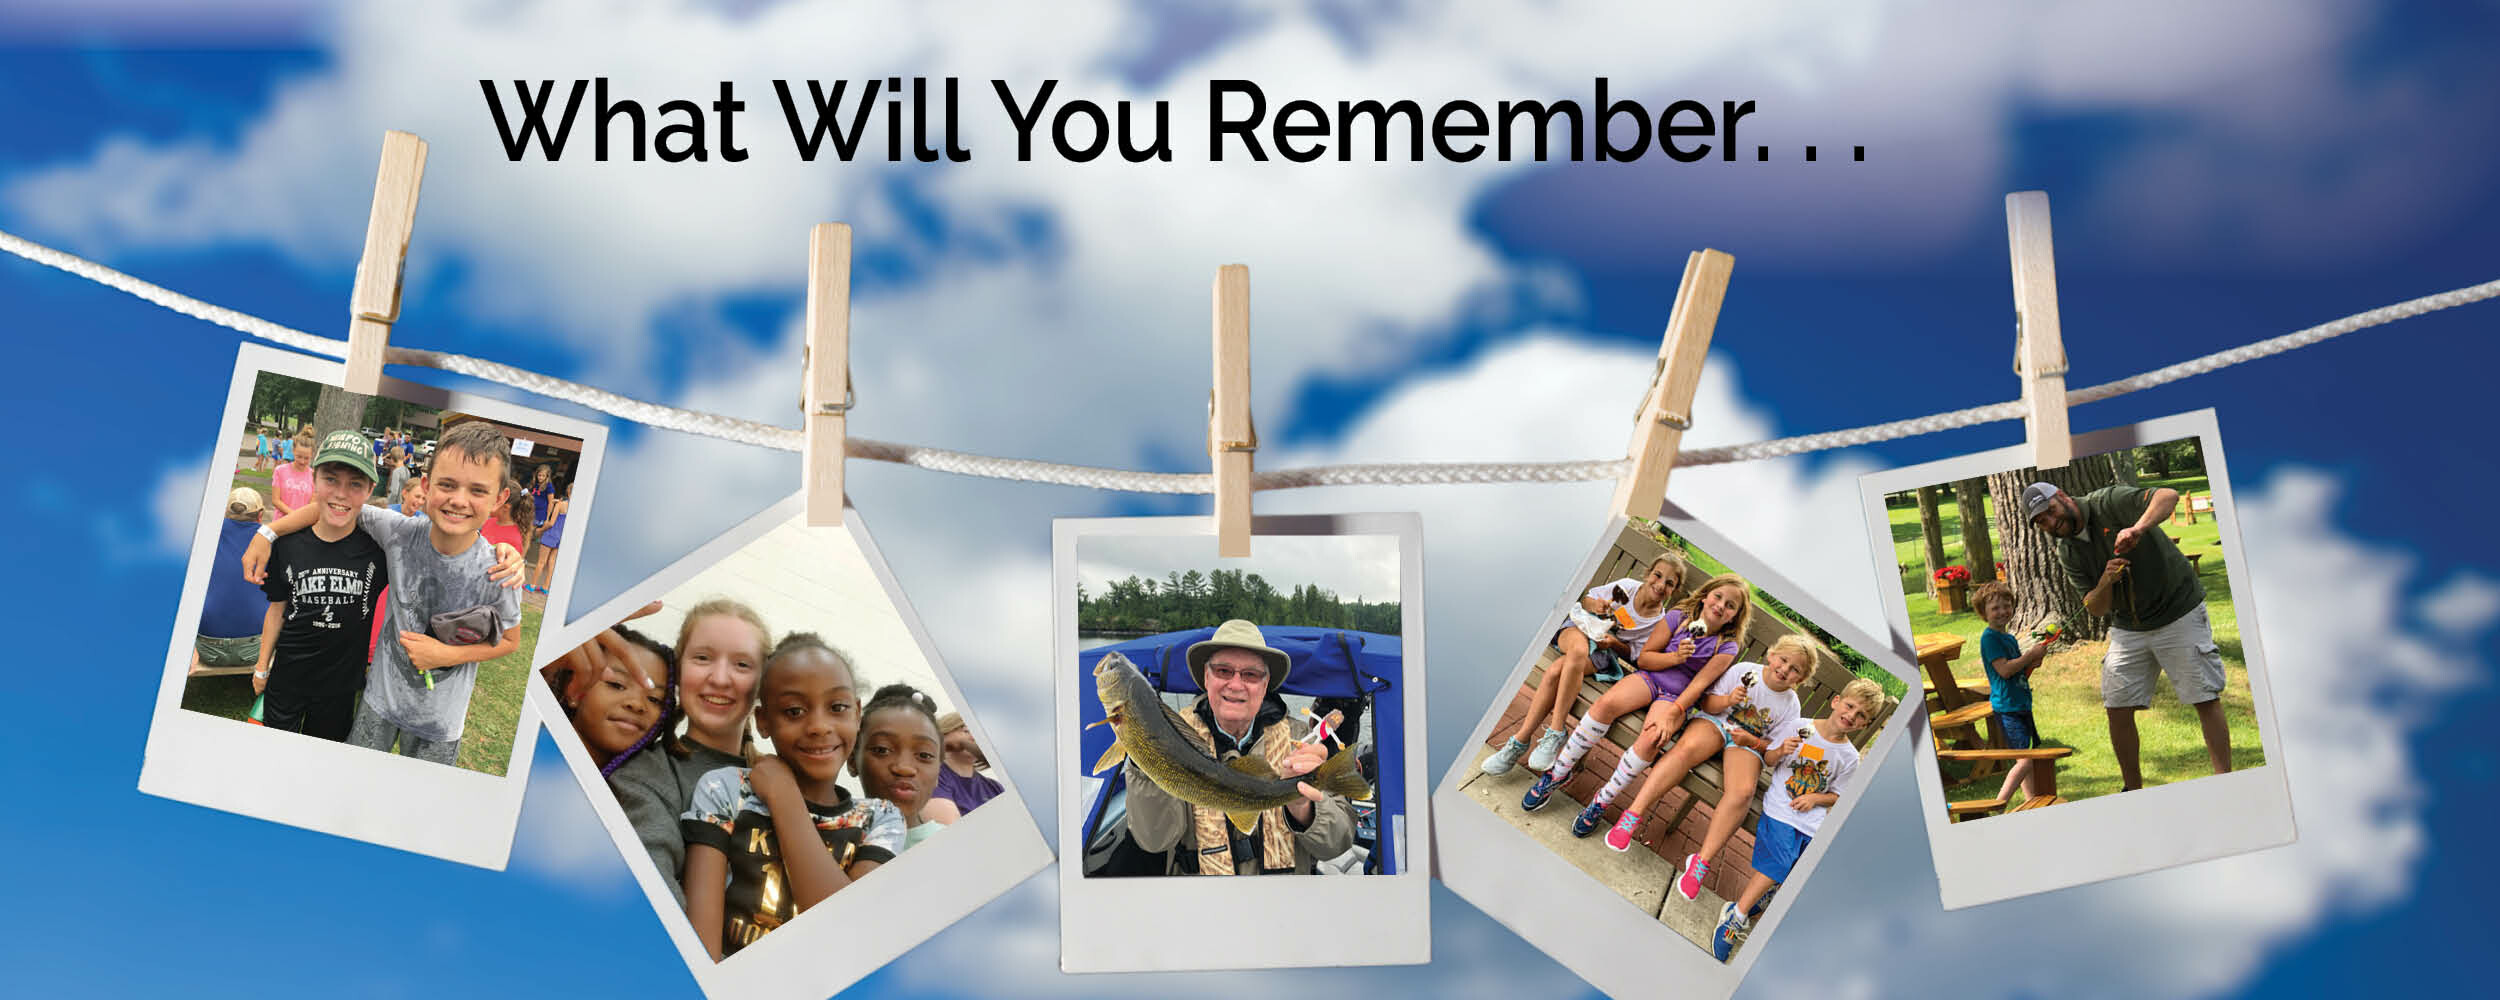 What Will You Remember